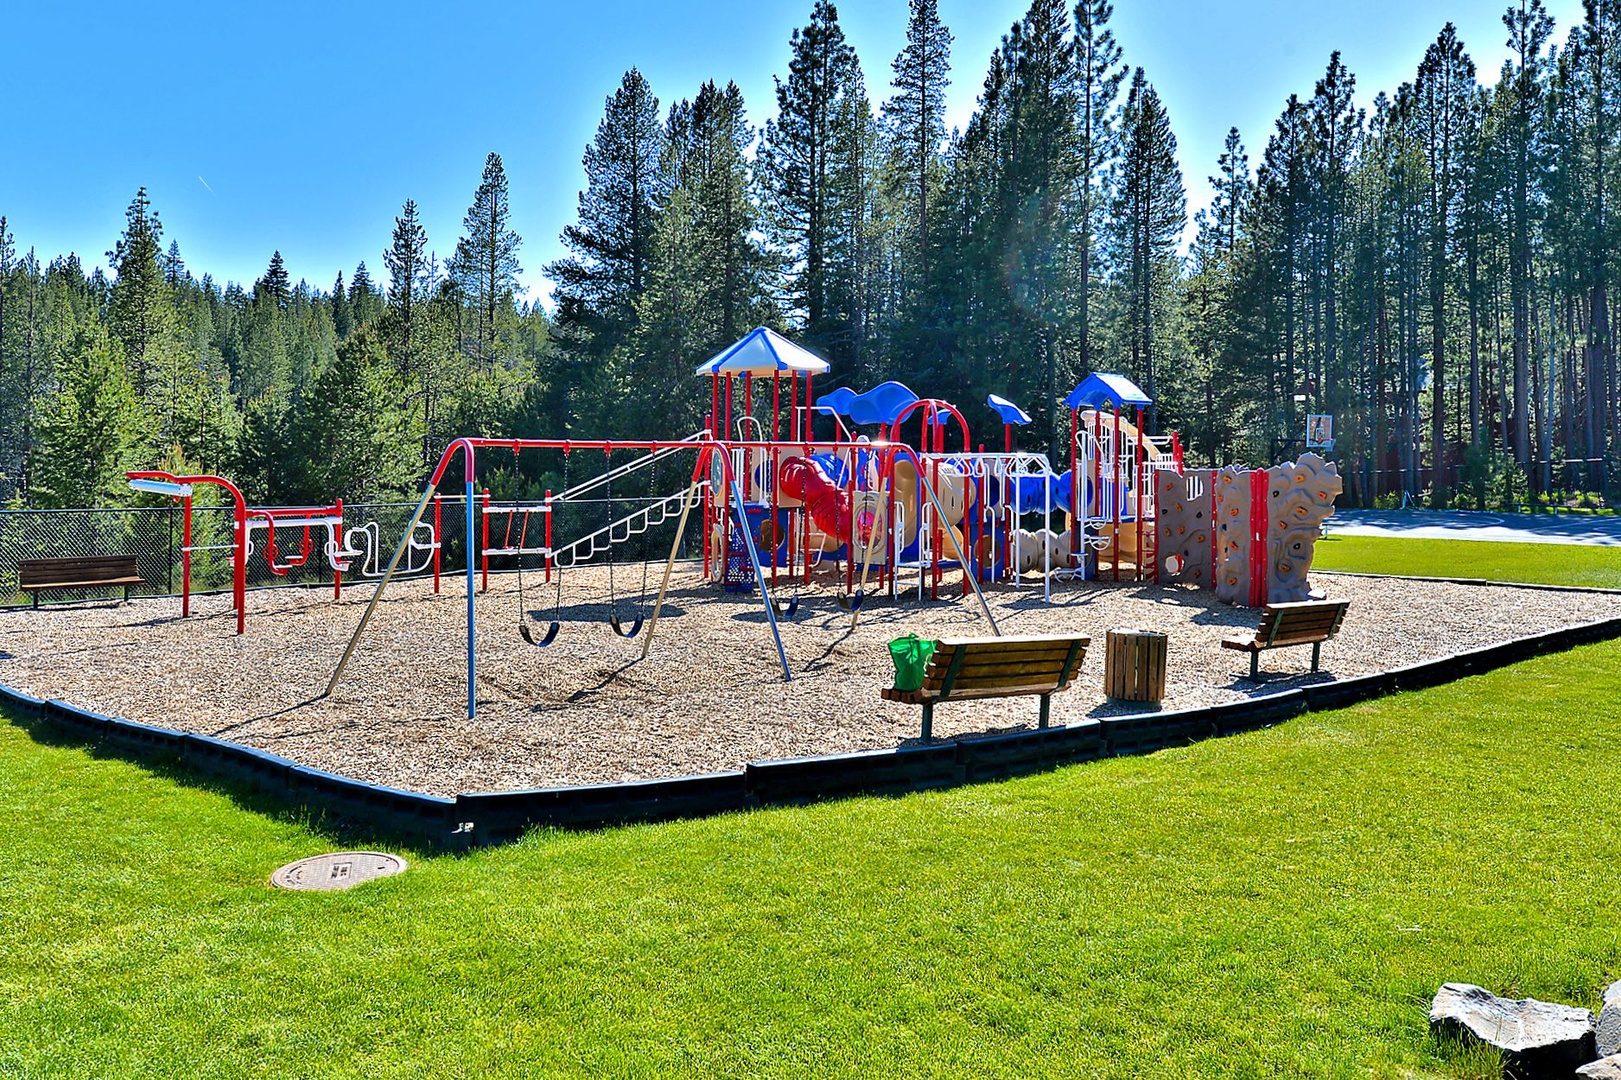 Trout Creek Rec Center Playground: Three Pines Family Cabin